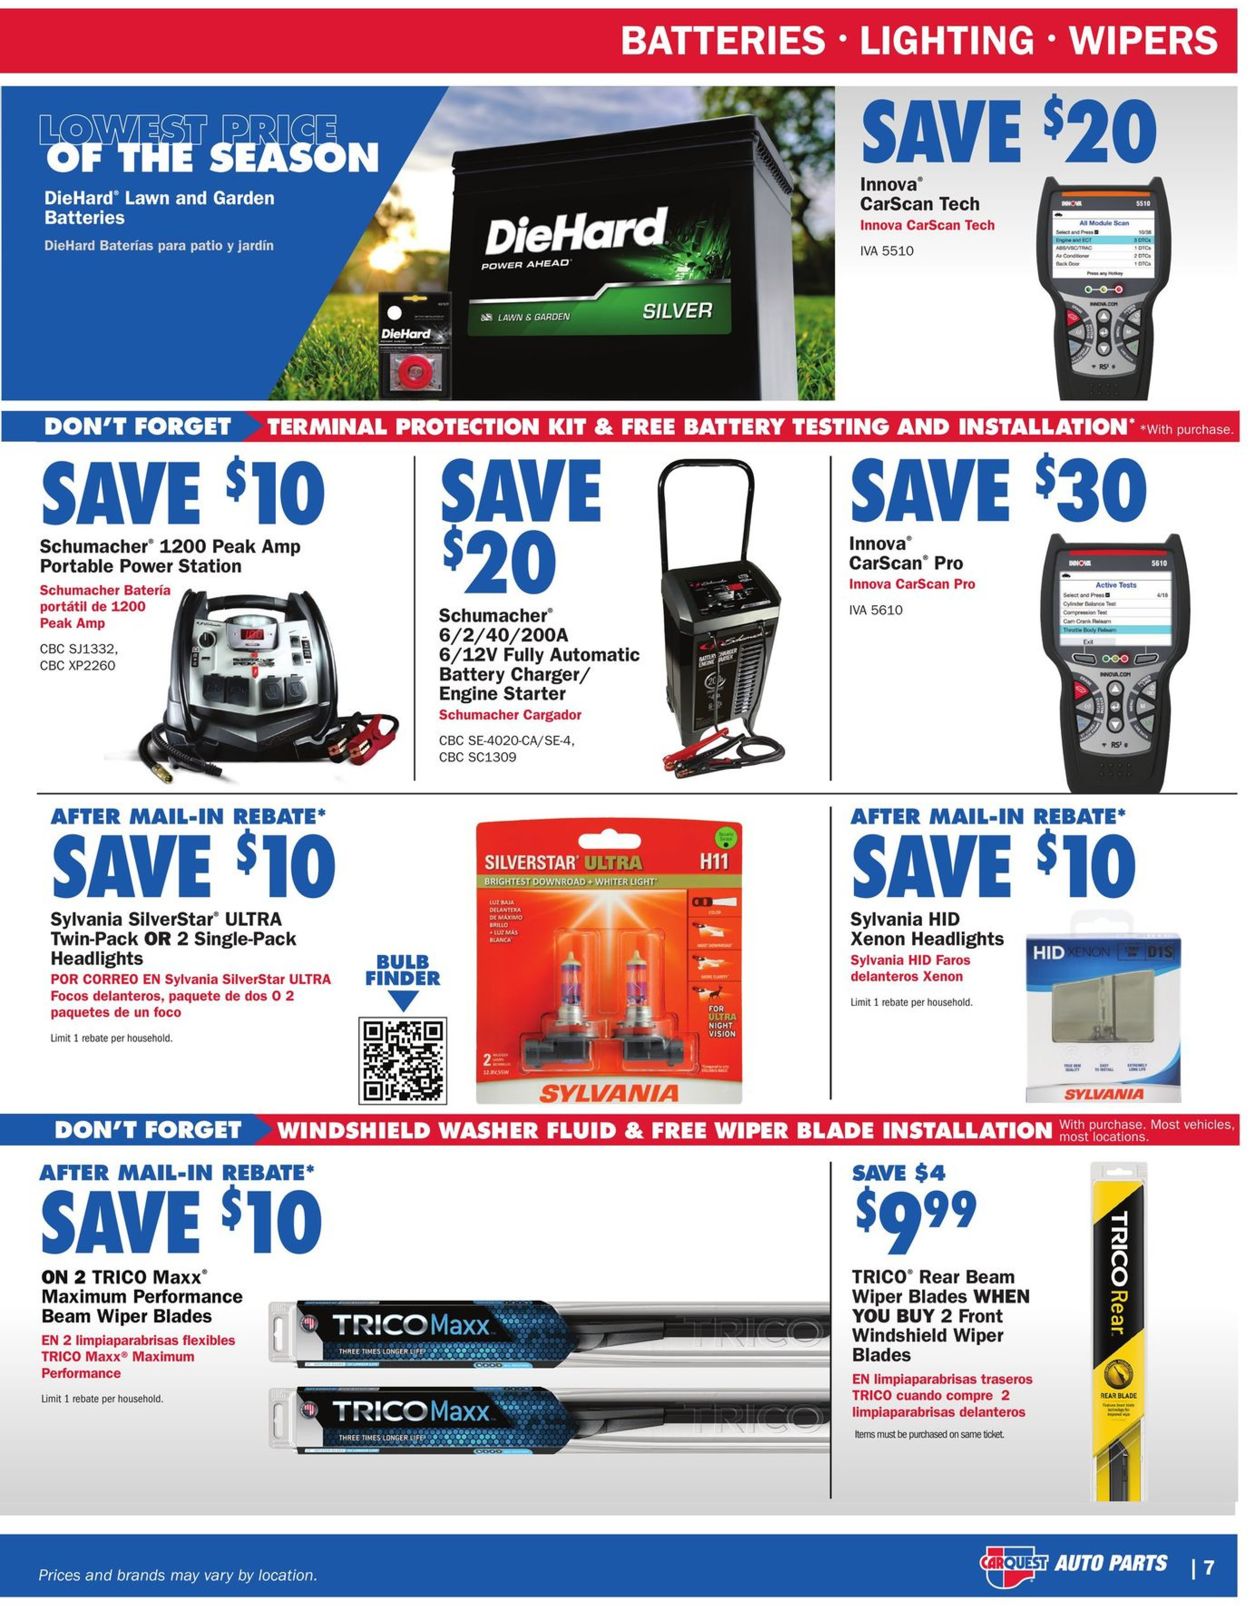 carquest-current-weekly-ad-04-01-04-28-2021-7-frequent-ads